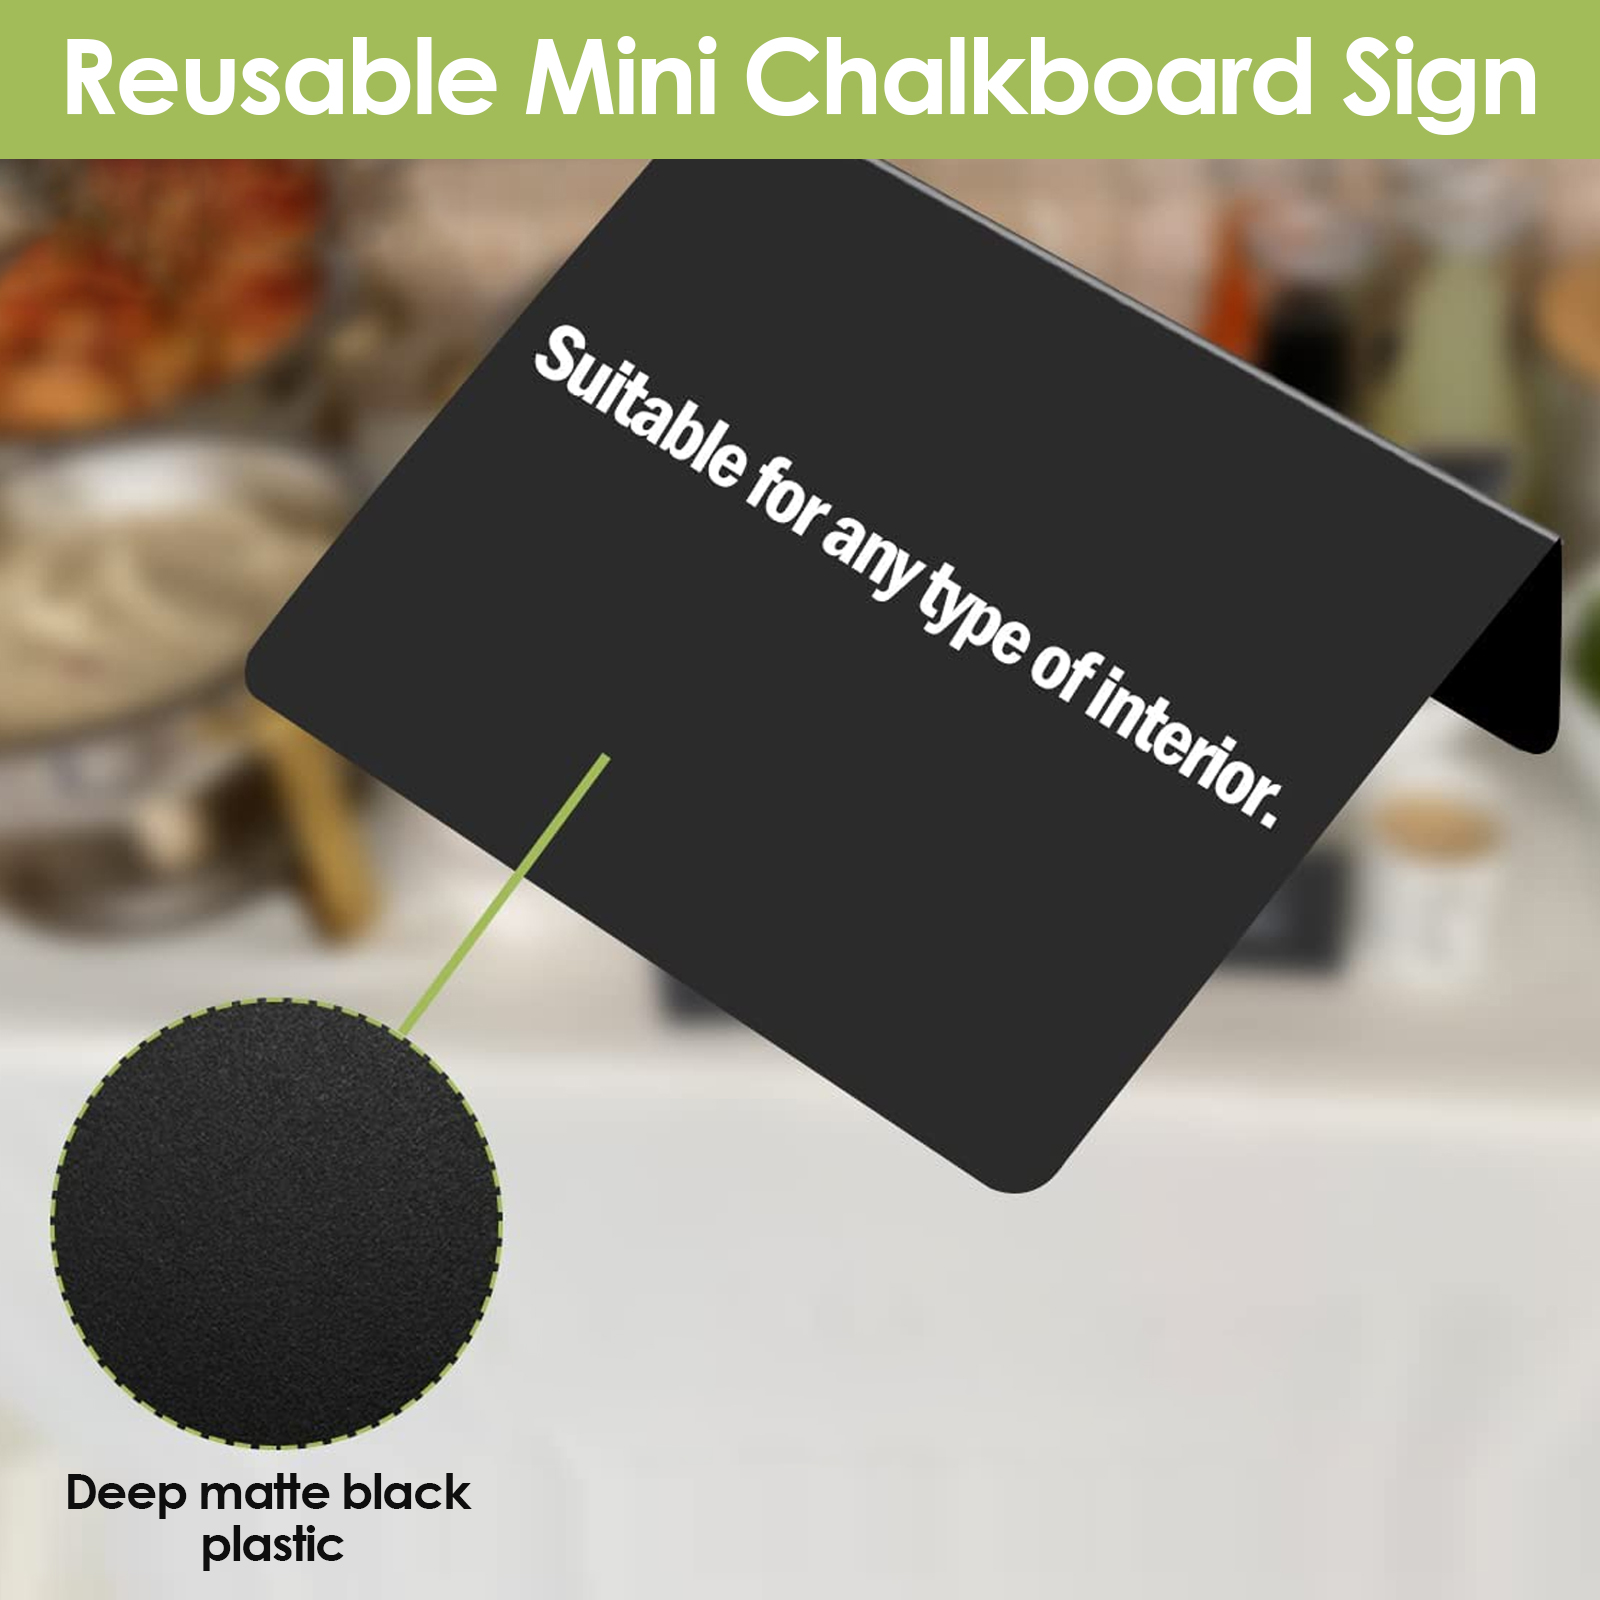 Parties Message Boards & Signs 4 x 3 inch Mini Chalkboard Signs for Labeling Set of 10 Small Chalkboard Reserved Signs for Food Pricetags 